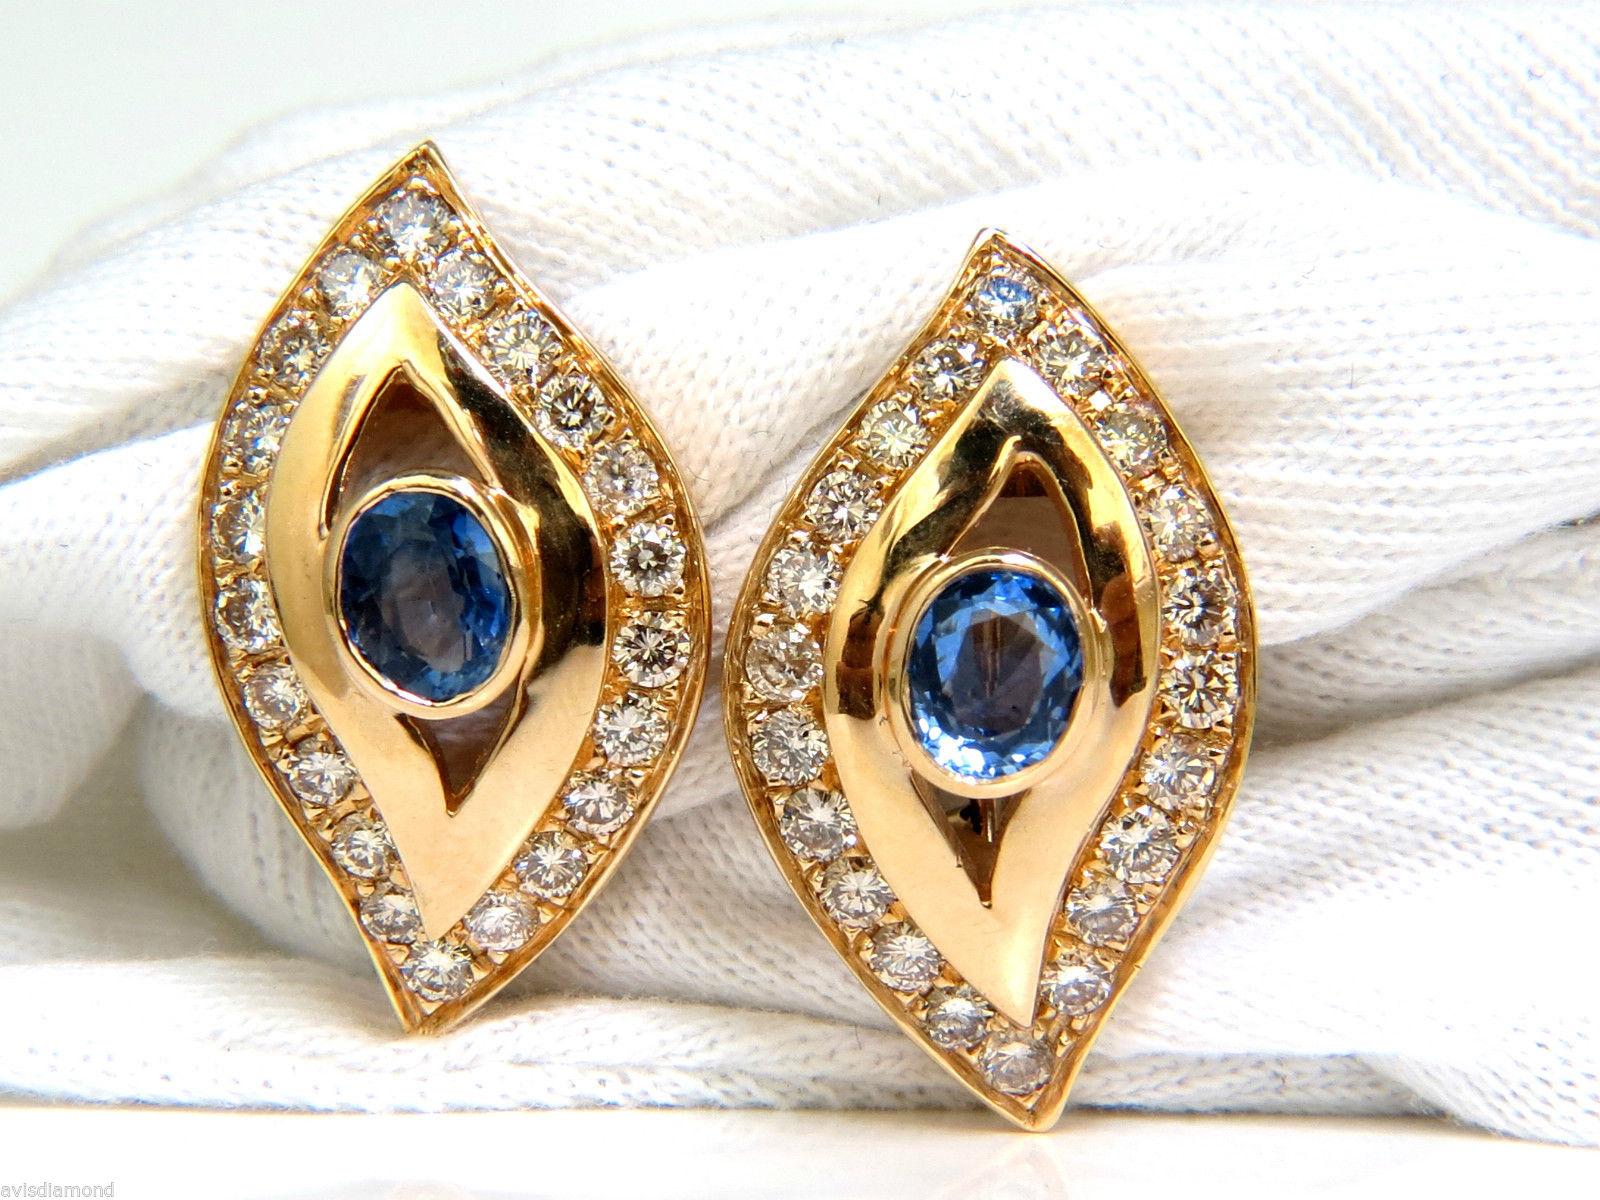 Glamour Revisted

2.00ct. Natural Sapphires

Clean clarity, full oval cuts and transparent.

Gorgeous Cornflower blues



Diamonds: 2.75ct.

full cut rounds

 I-J color 

 Vs-2 Si-1 clarity.

14KT yellow gold.

14 grams

Comfortable omega